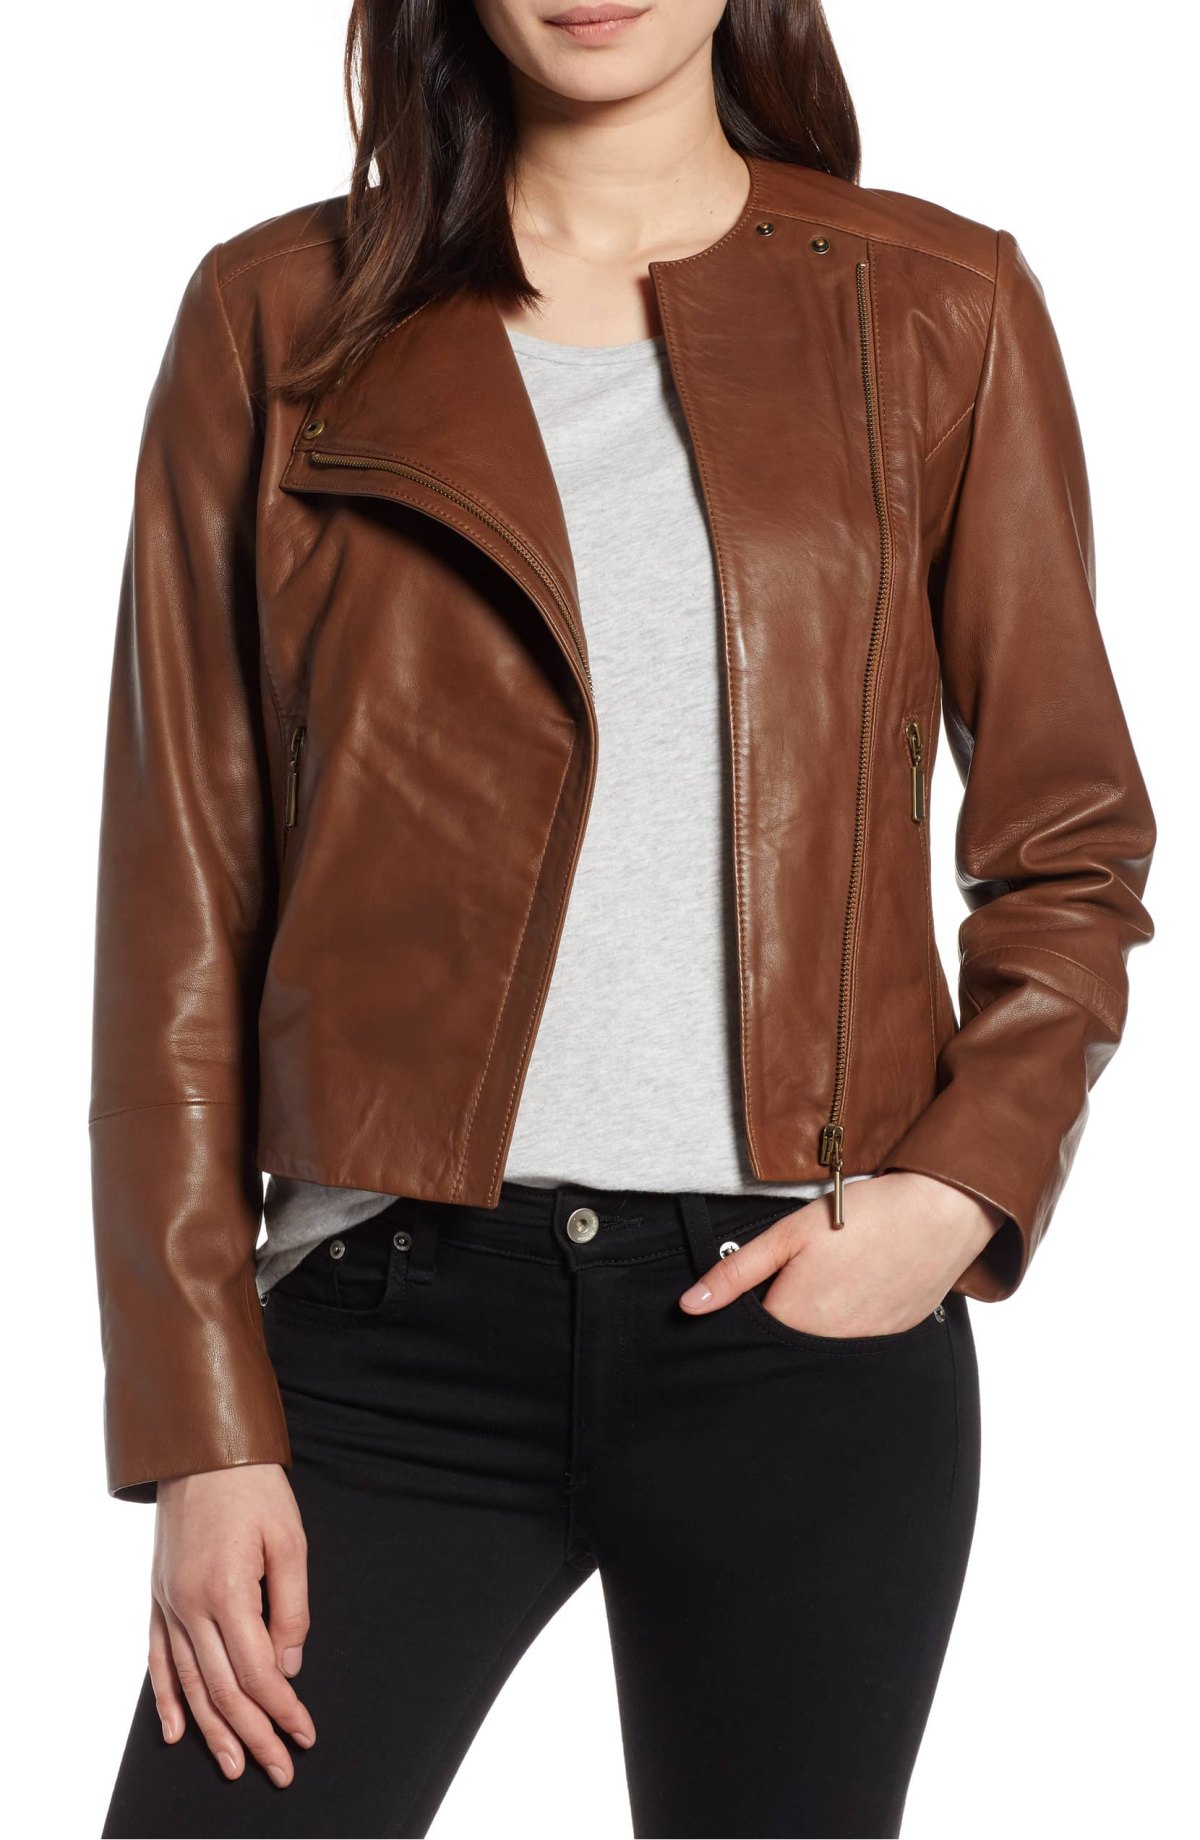 Welcome Fall in Style With This Collarless Leather Jacket | Us Weekly